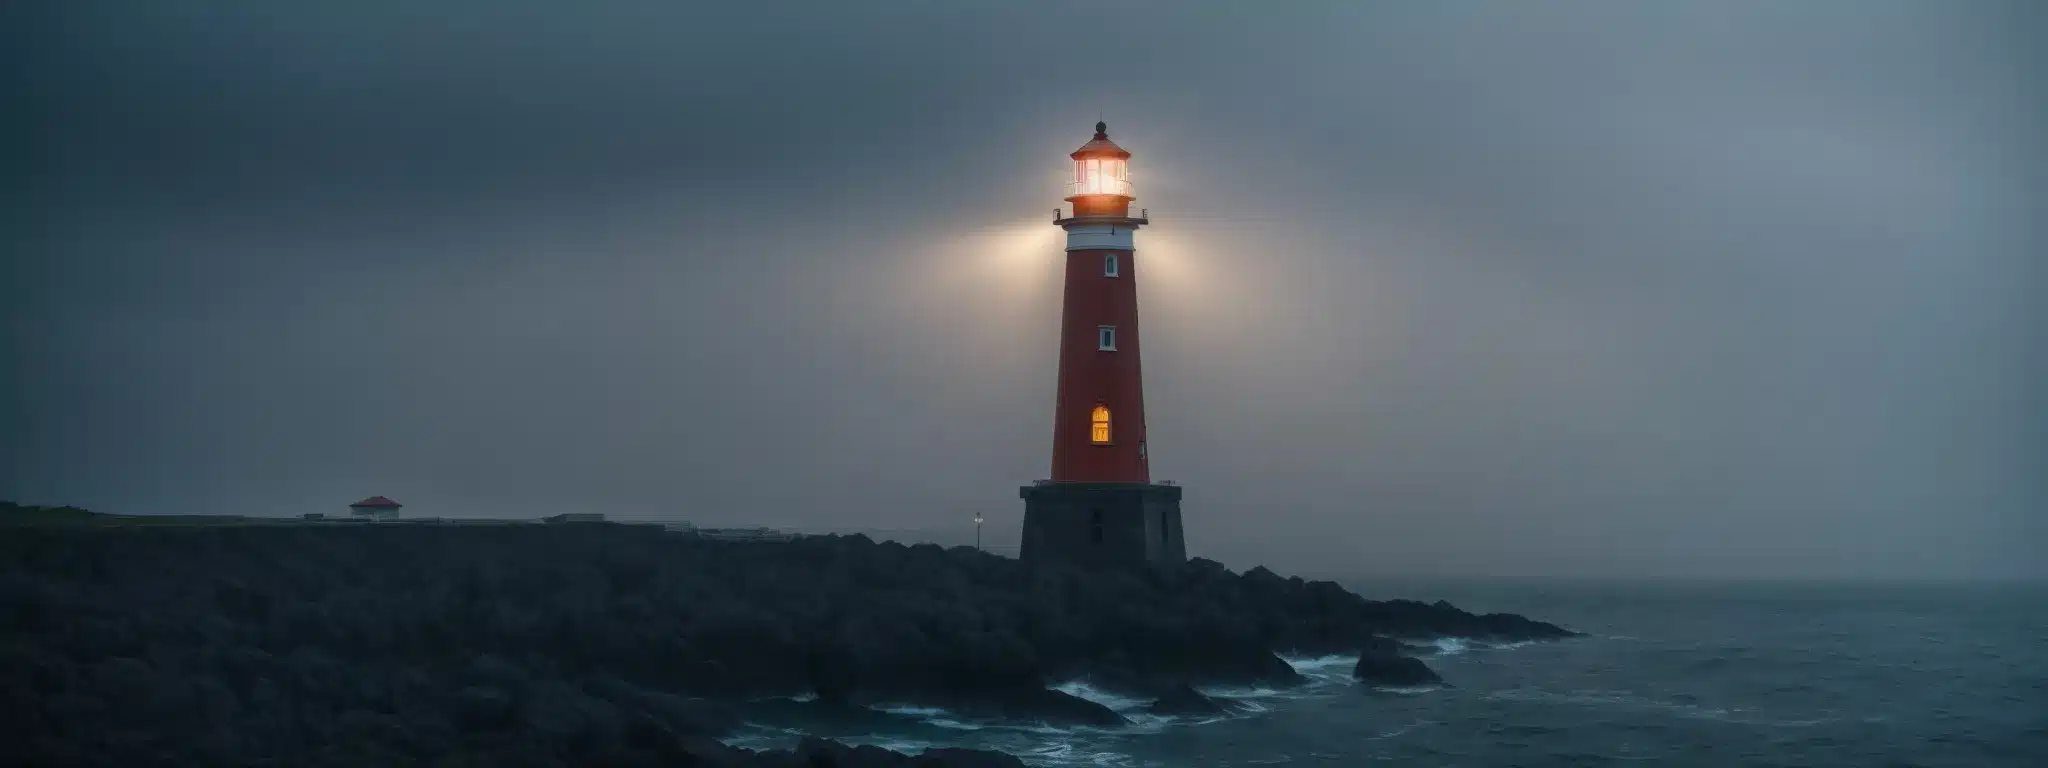 A Lighthouse Stands Resilient Along The Coastline, Its Beam Cutting Through The Foggy Night, Symbolizing Guidance And Endurance.